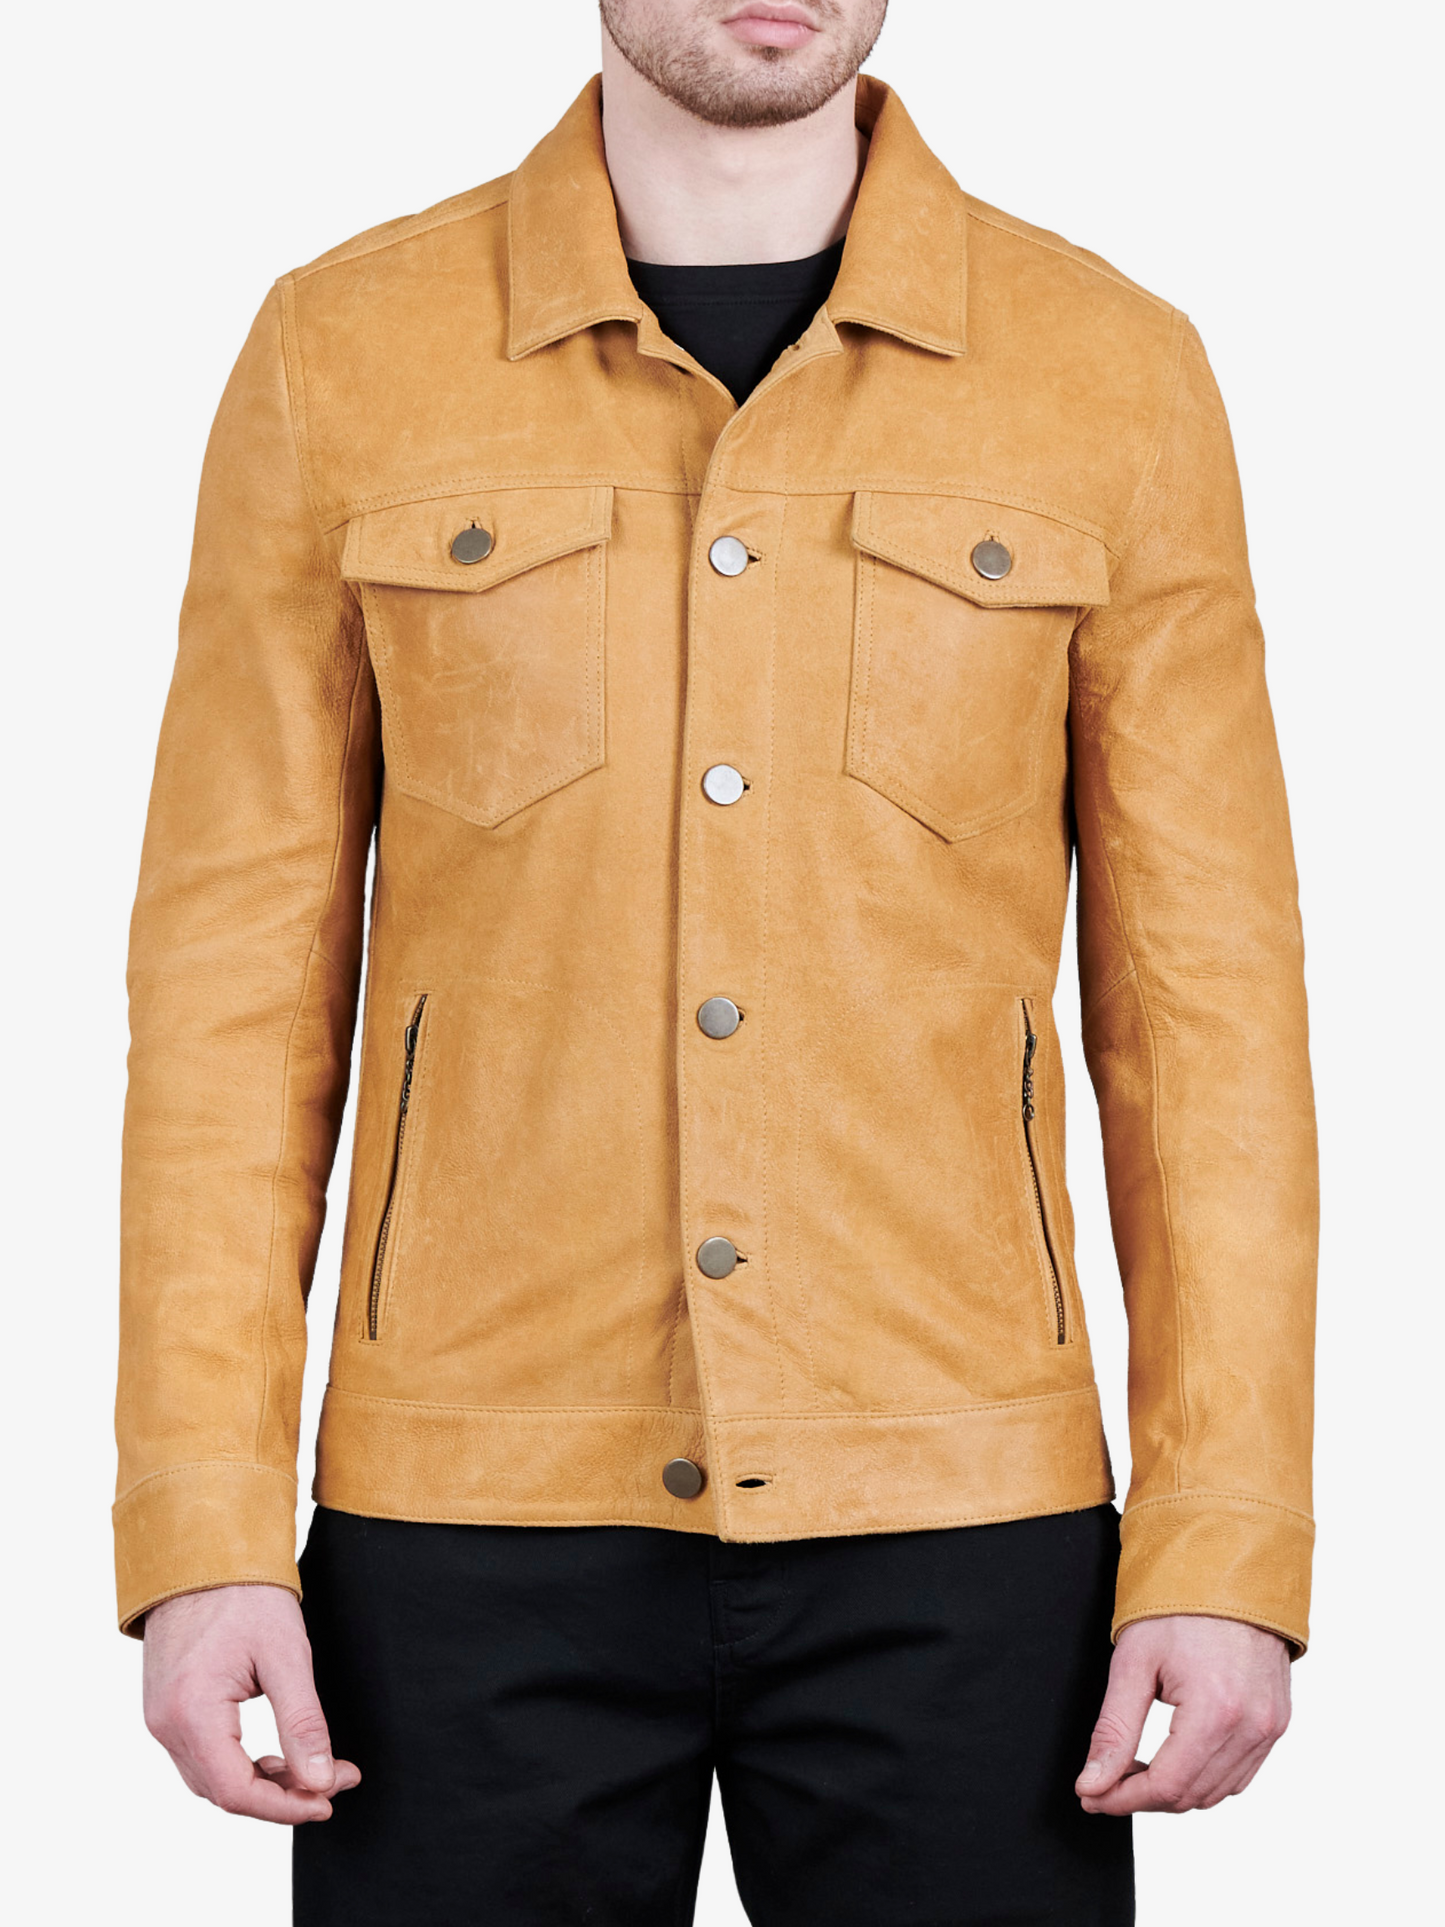 THE RANCHER JACKET